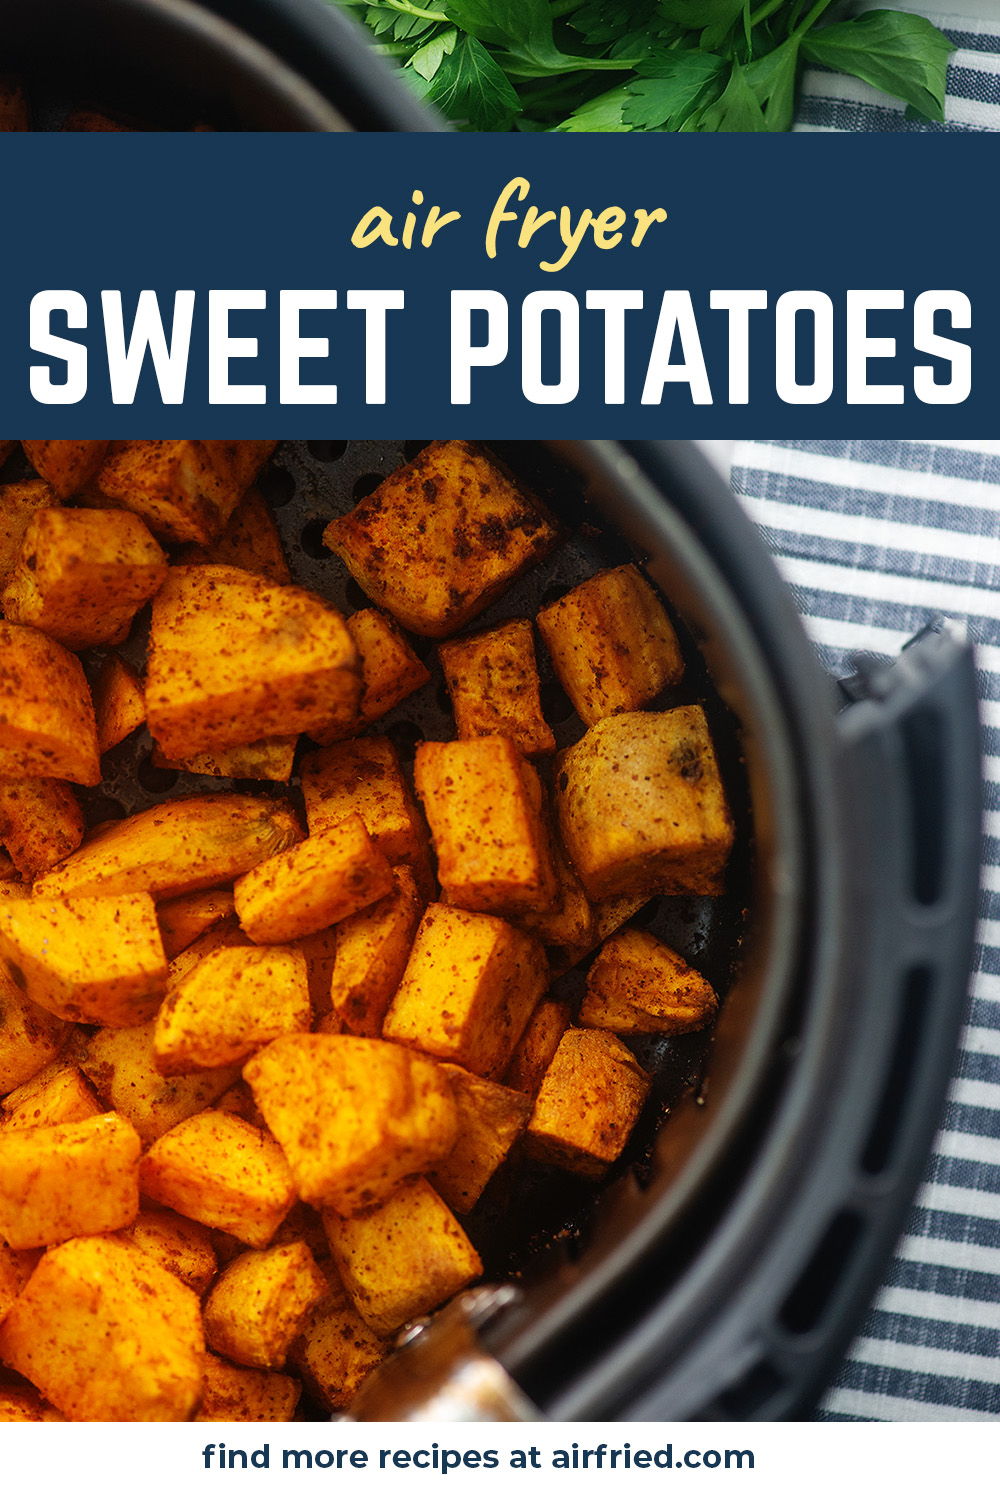 Overhead view of sweet potato cubes in an air fryer basket on a striped cloth napkin.